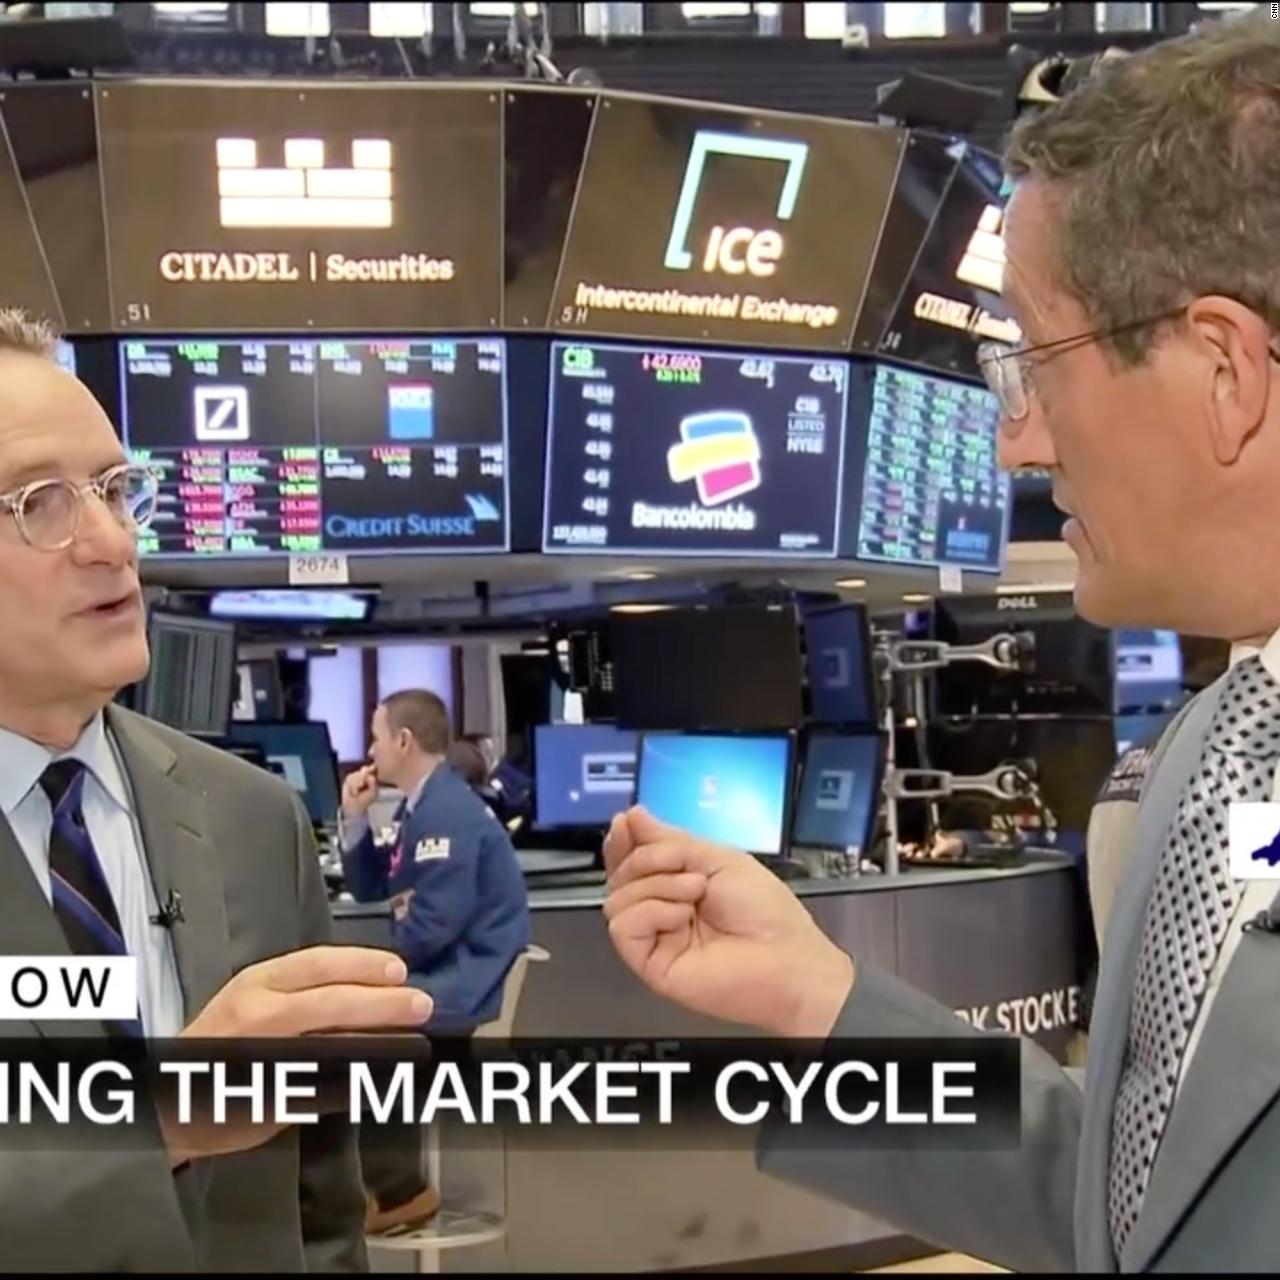 CNNMoney's "Markets Now" streams live from the NYSE every Wednesday at 12:45 p.m. ET.